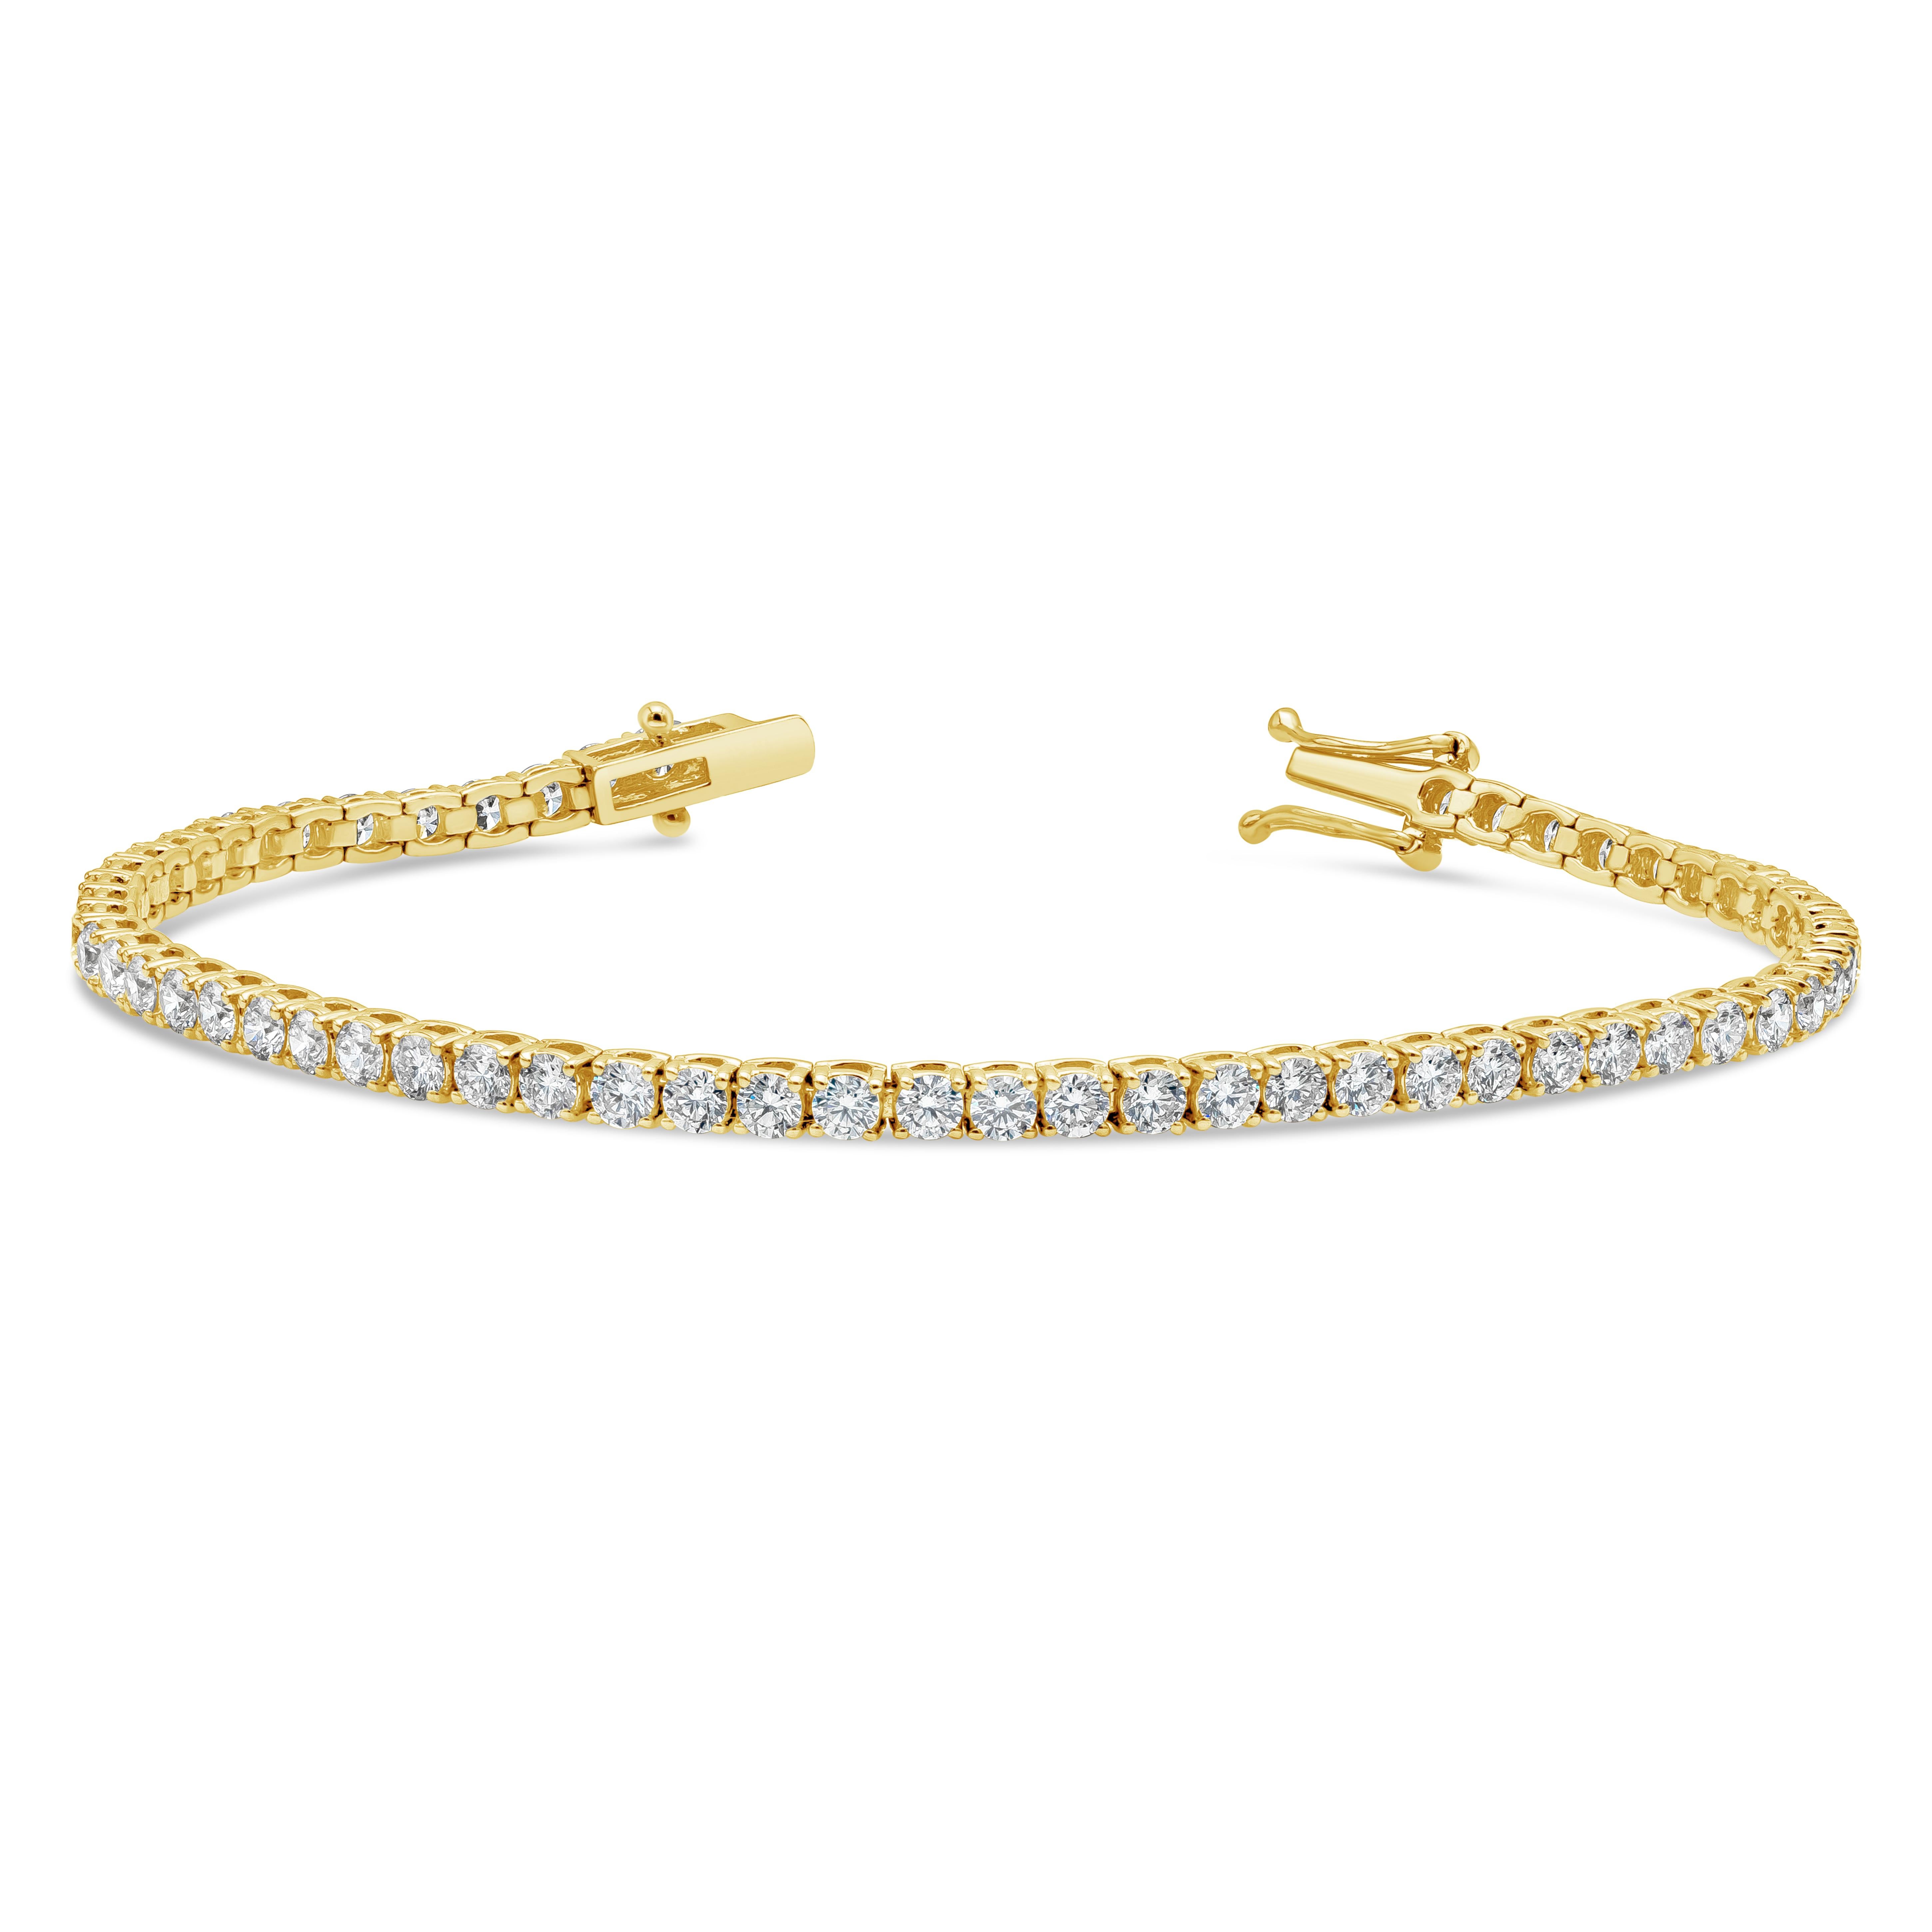 ﻿A classic tennis bracelet style showcasing 58 round brilliant diamonds weighing 4.70 carats total, F-G  Color and SI in Clarity. Made with 18K Yellow Gold. 2.80mm Width and 7 inches in Length. 

Roman Malakov is a custom house, specializing in